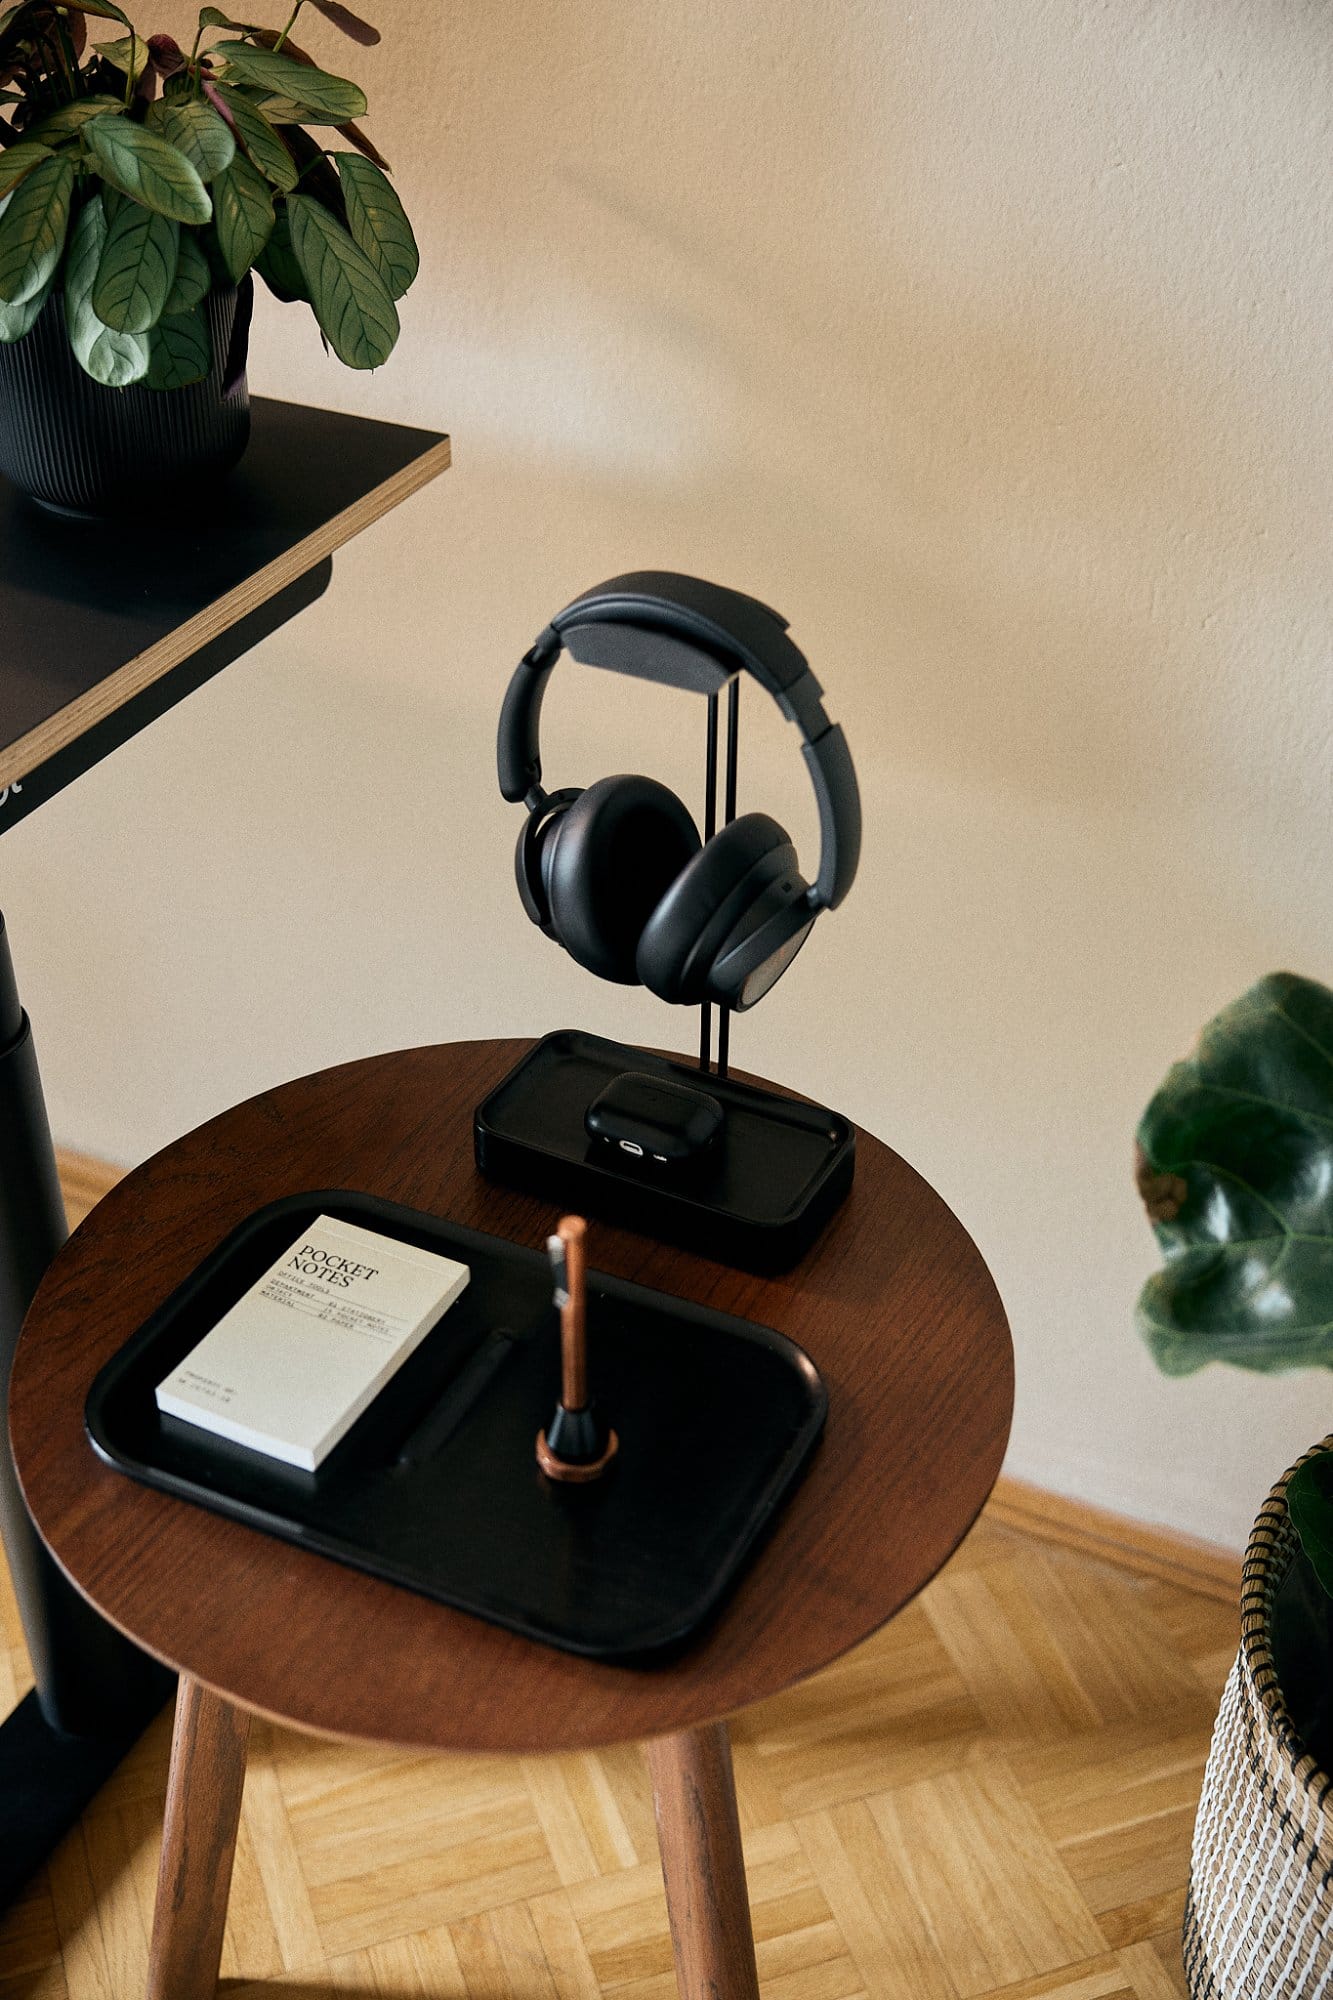  A contemporary side table holds a pair of headphones on a stand, a charging smartphone, and a pocket notebook beside a potted plant on a shelf above